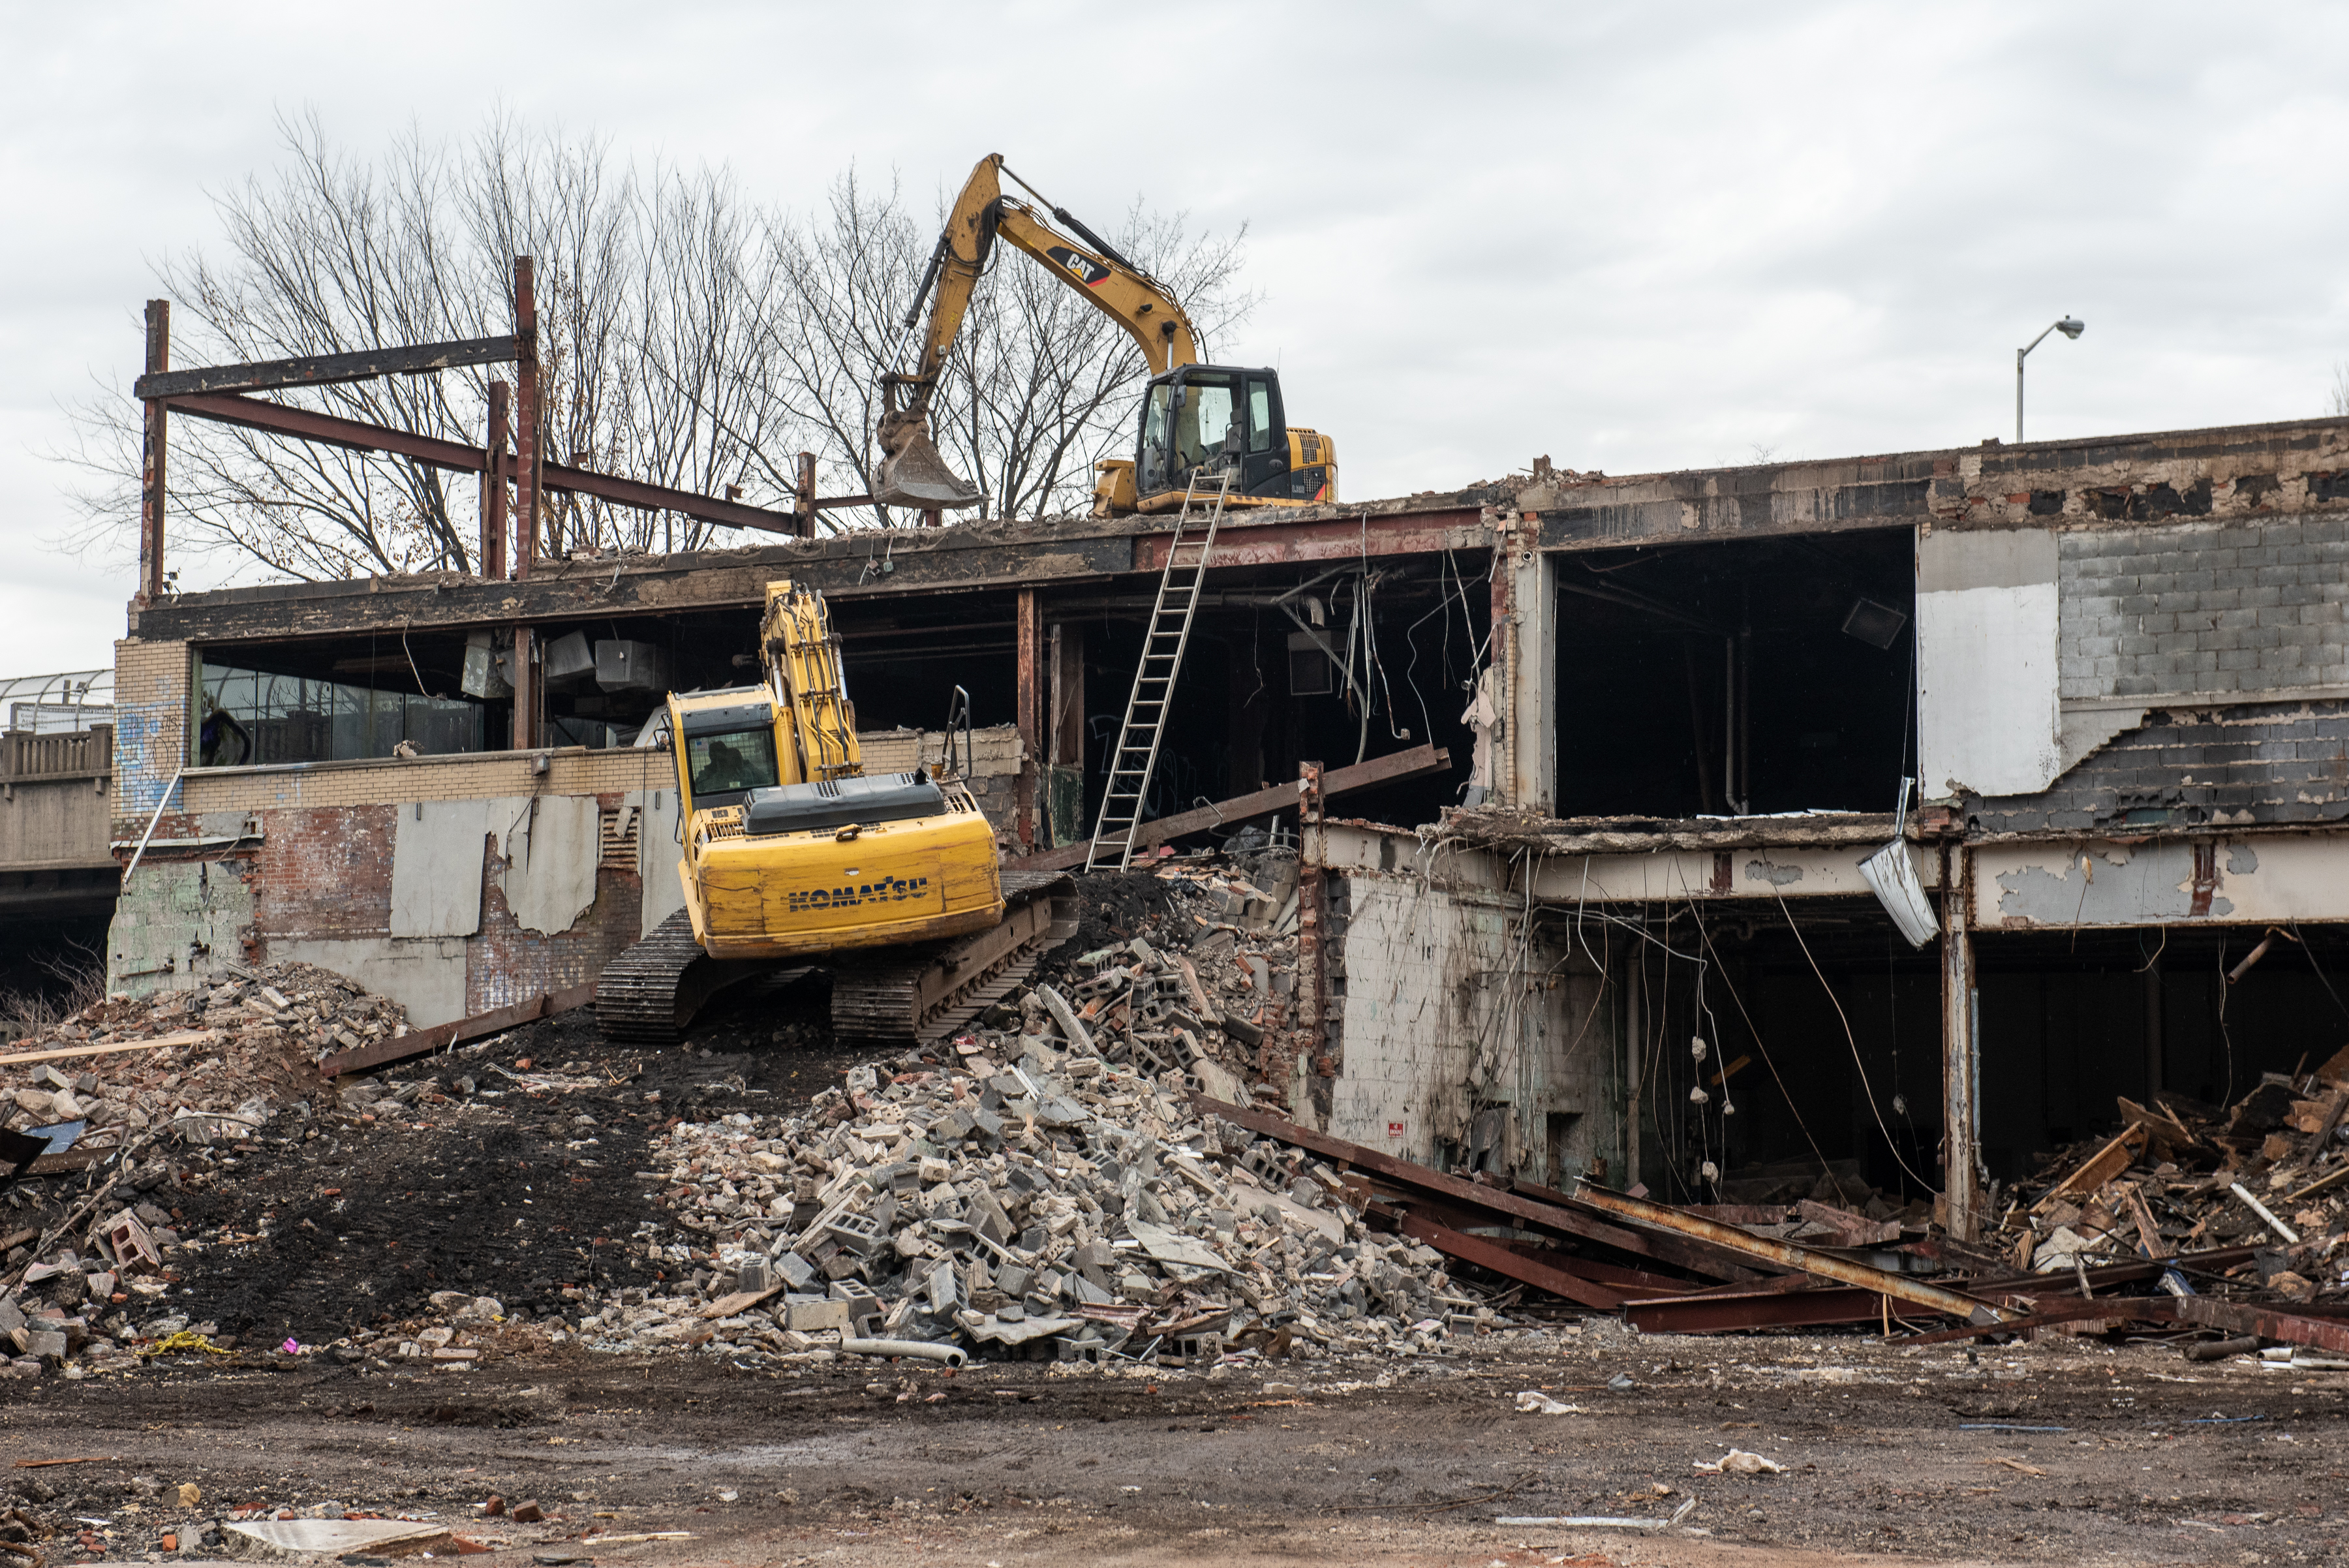 The former A.C. Chevrolet dealership at 3085 Kennedy Blvd. in Jersey City is being demolished, Tuesday, Dec. 6, 2022. (Reena Rose Sibayan | The Jersey Journal)